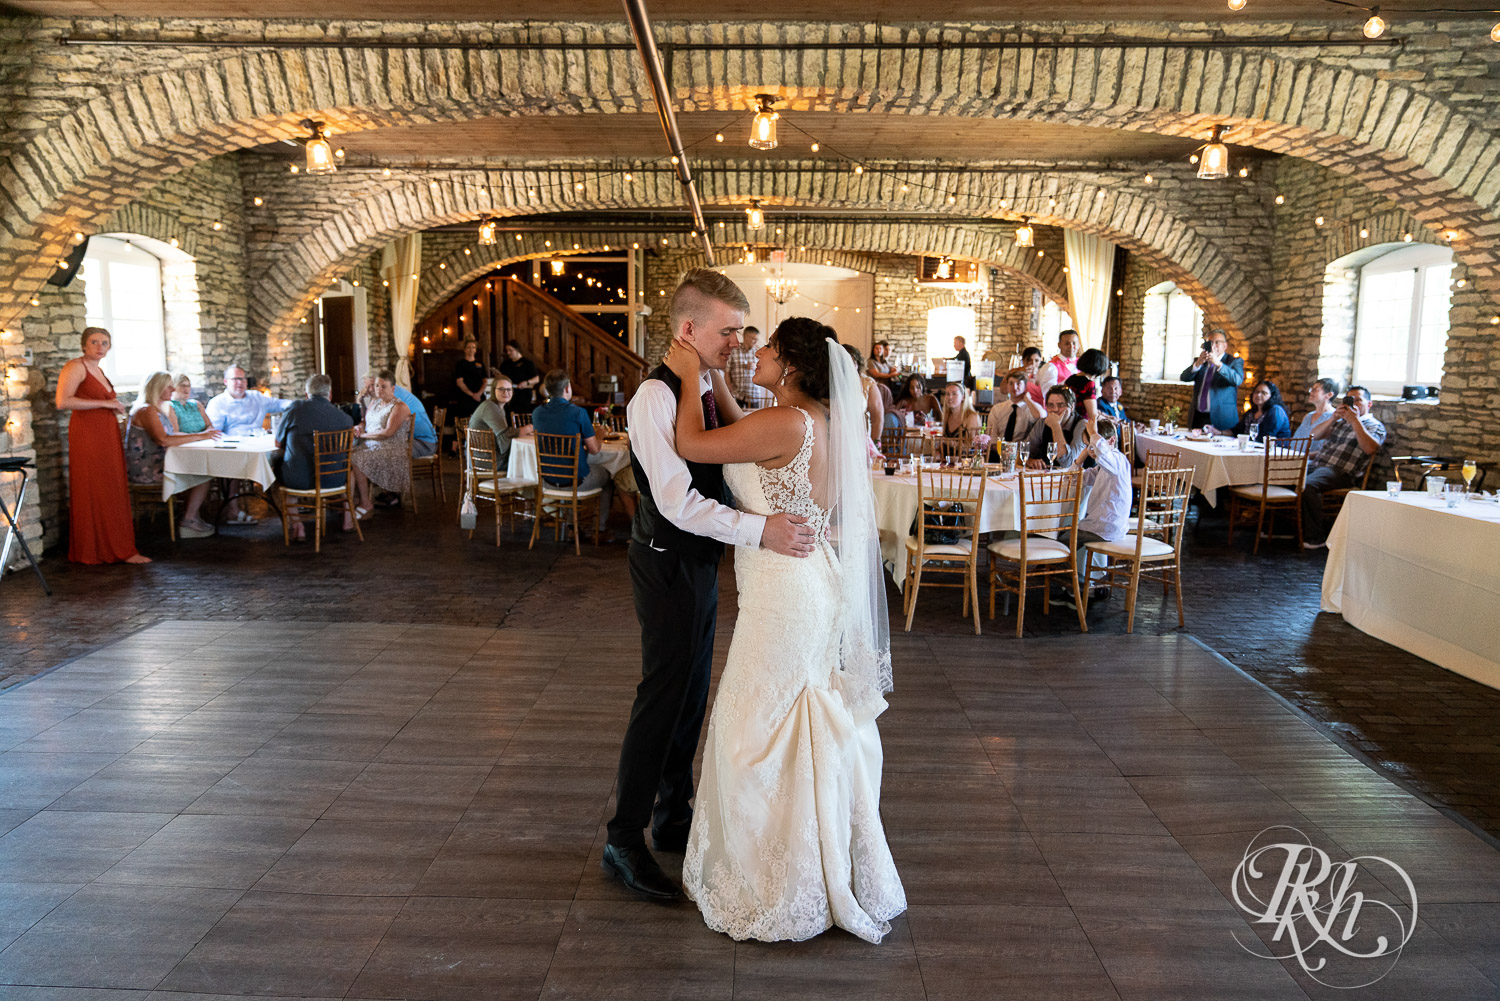 Bride and groom dancing at wedding reception at Mayowood Stone Barn in Rochester, Minnesota.